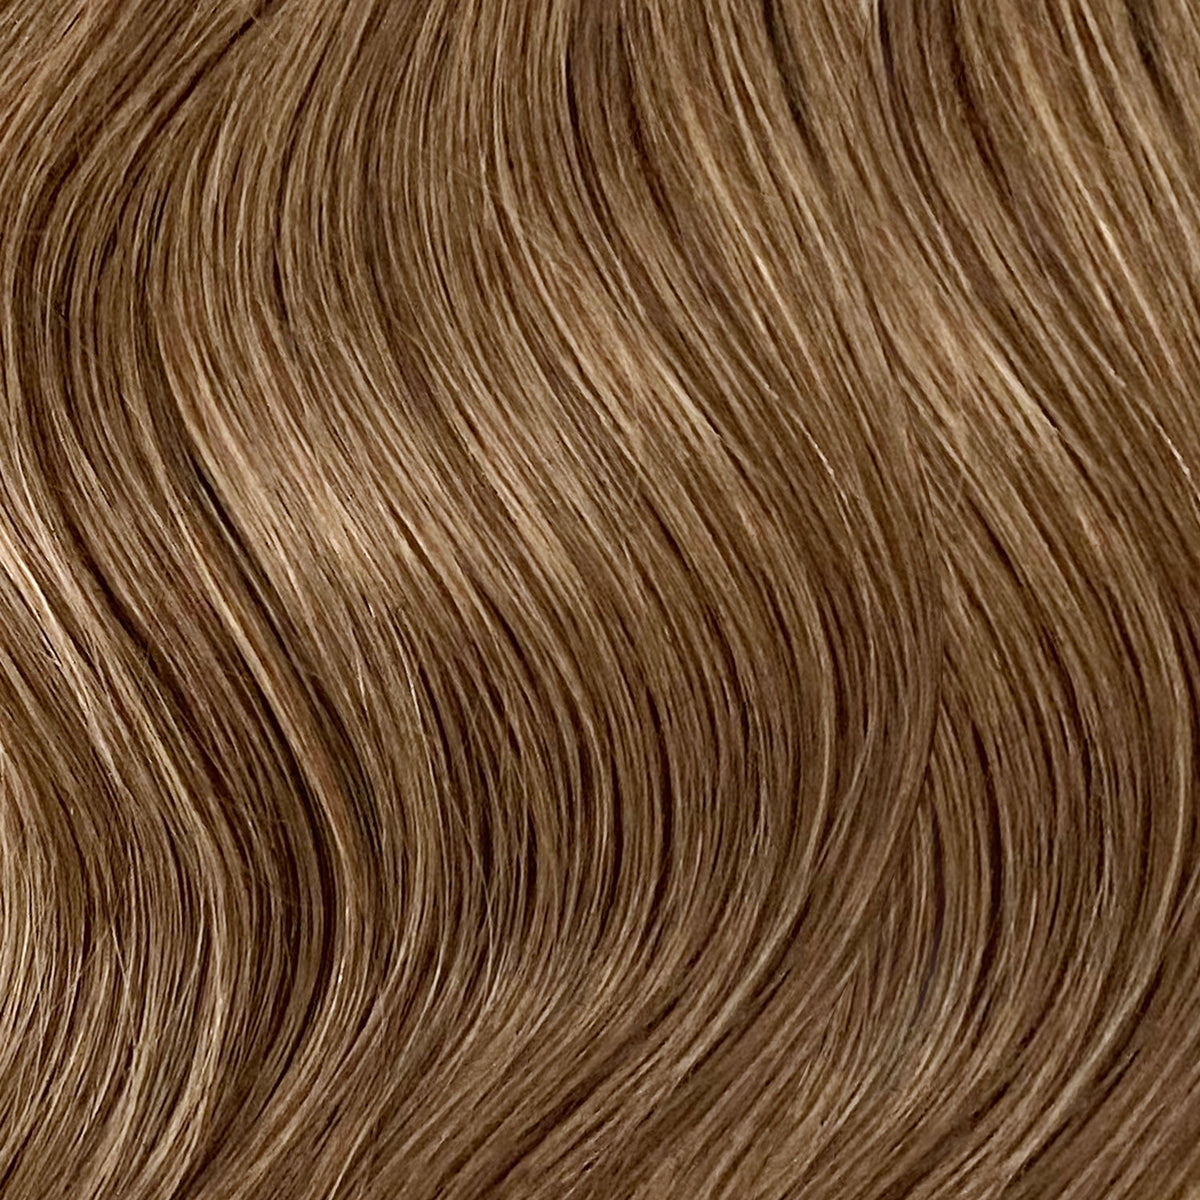 Weft Hair Extensions #12 Dirty Blonde 21"